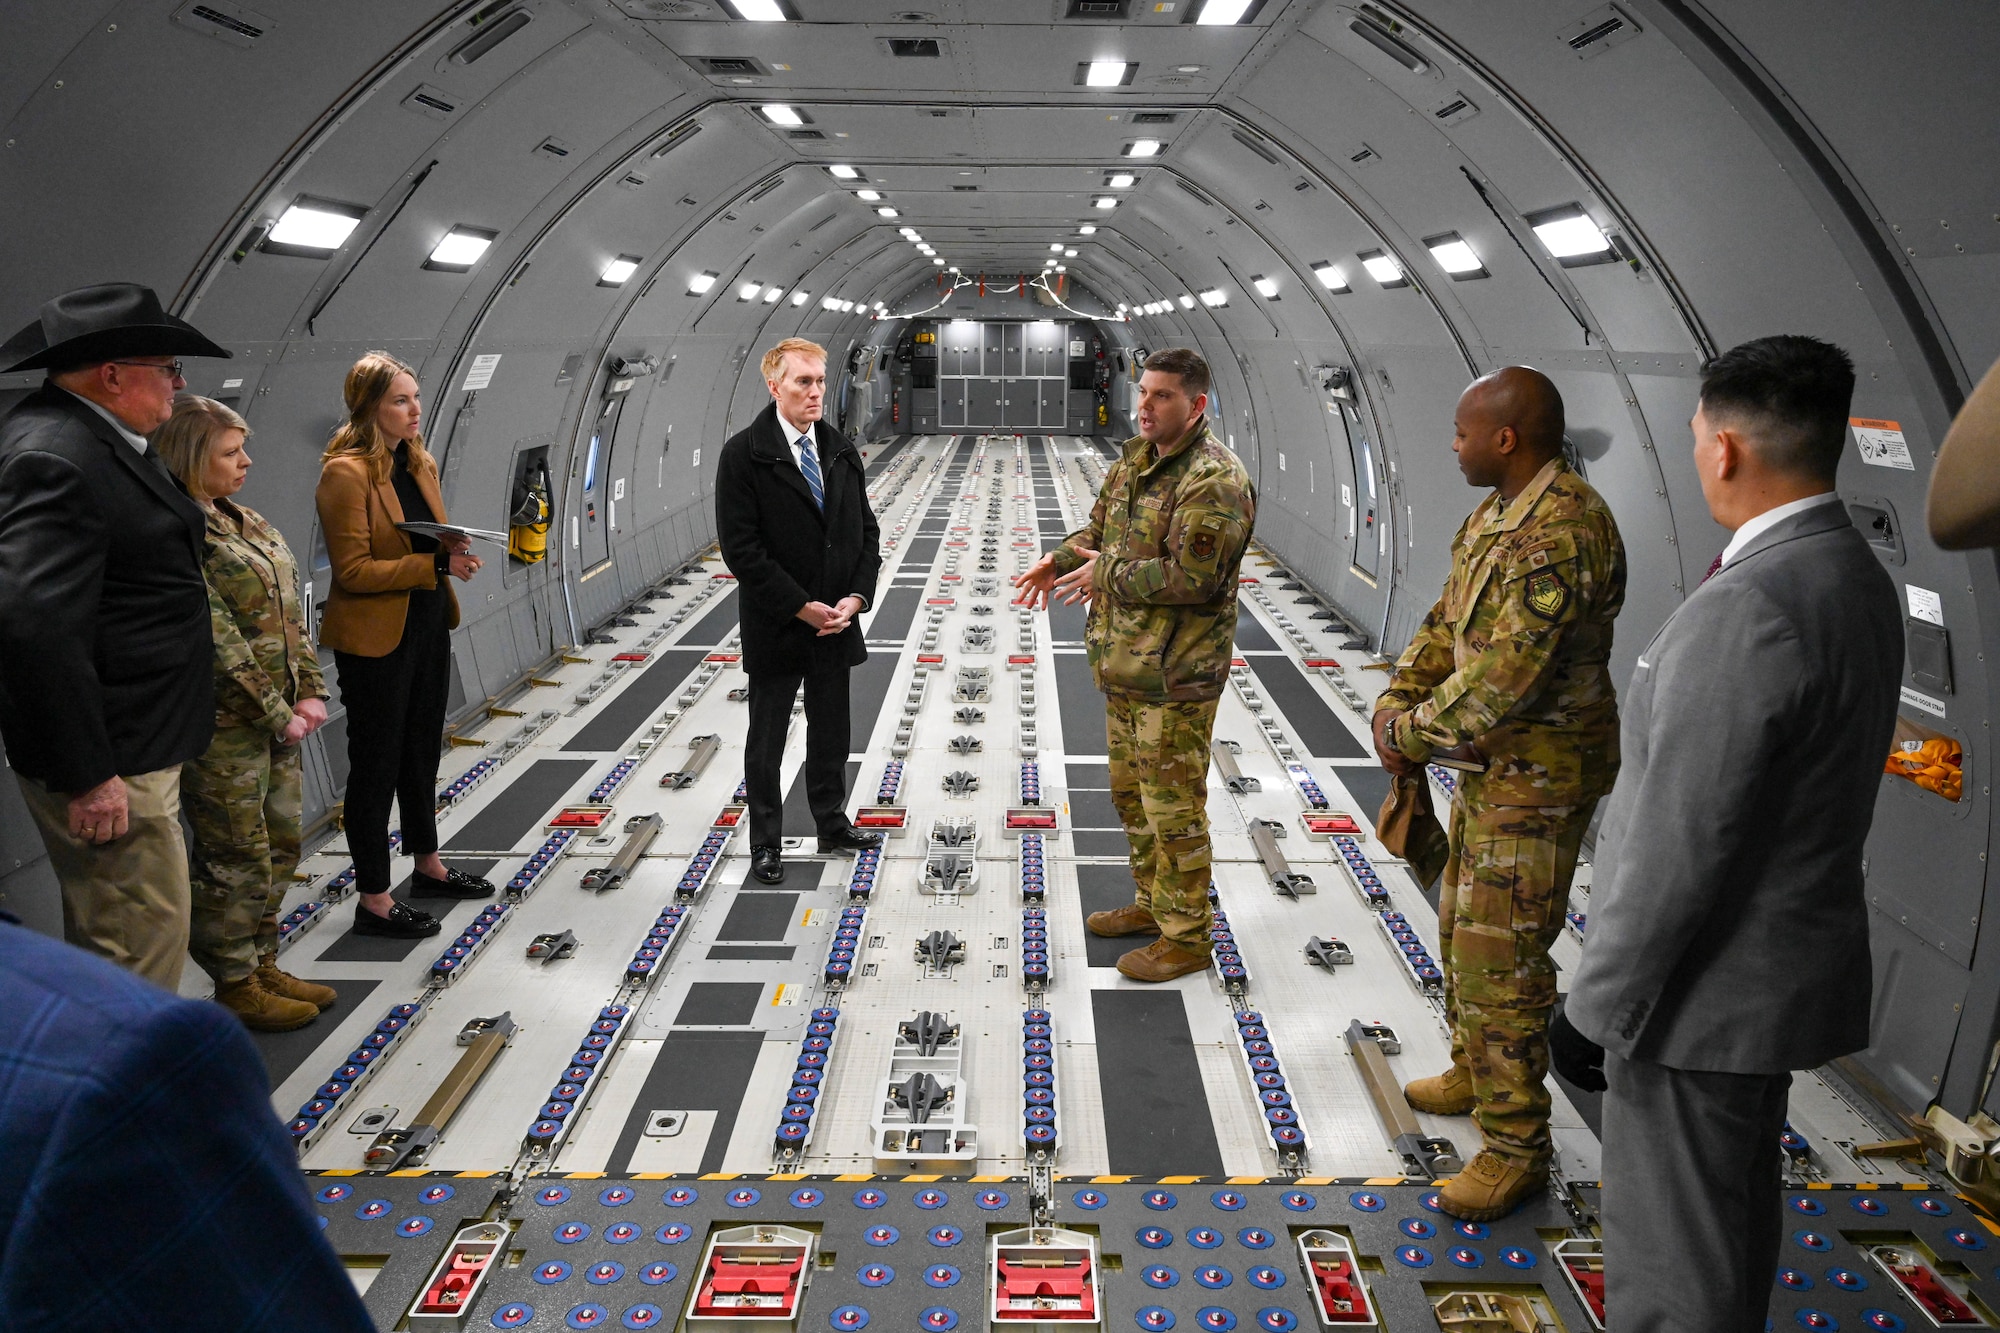 U.S. Air Force Lt. Col. Teddy Boyd (center-right), 56th Air Refueling Squadron commander, talks about the KC-46 Pegasus with U.S. Sen. James Lankford of Oklahoma (center-left), at Altus Air Force Base, Oklahoma, Feb. 23, 2023. With more refueling capacity, improved efficiency and increased capabilities for cargo and aeromedical evacuation, the KC-46 provides aerial refueling support to the Air Force, Navy and Marine Corps. (U.S. Air Force photo by Senior Airman Trenton Jancze)